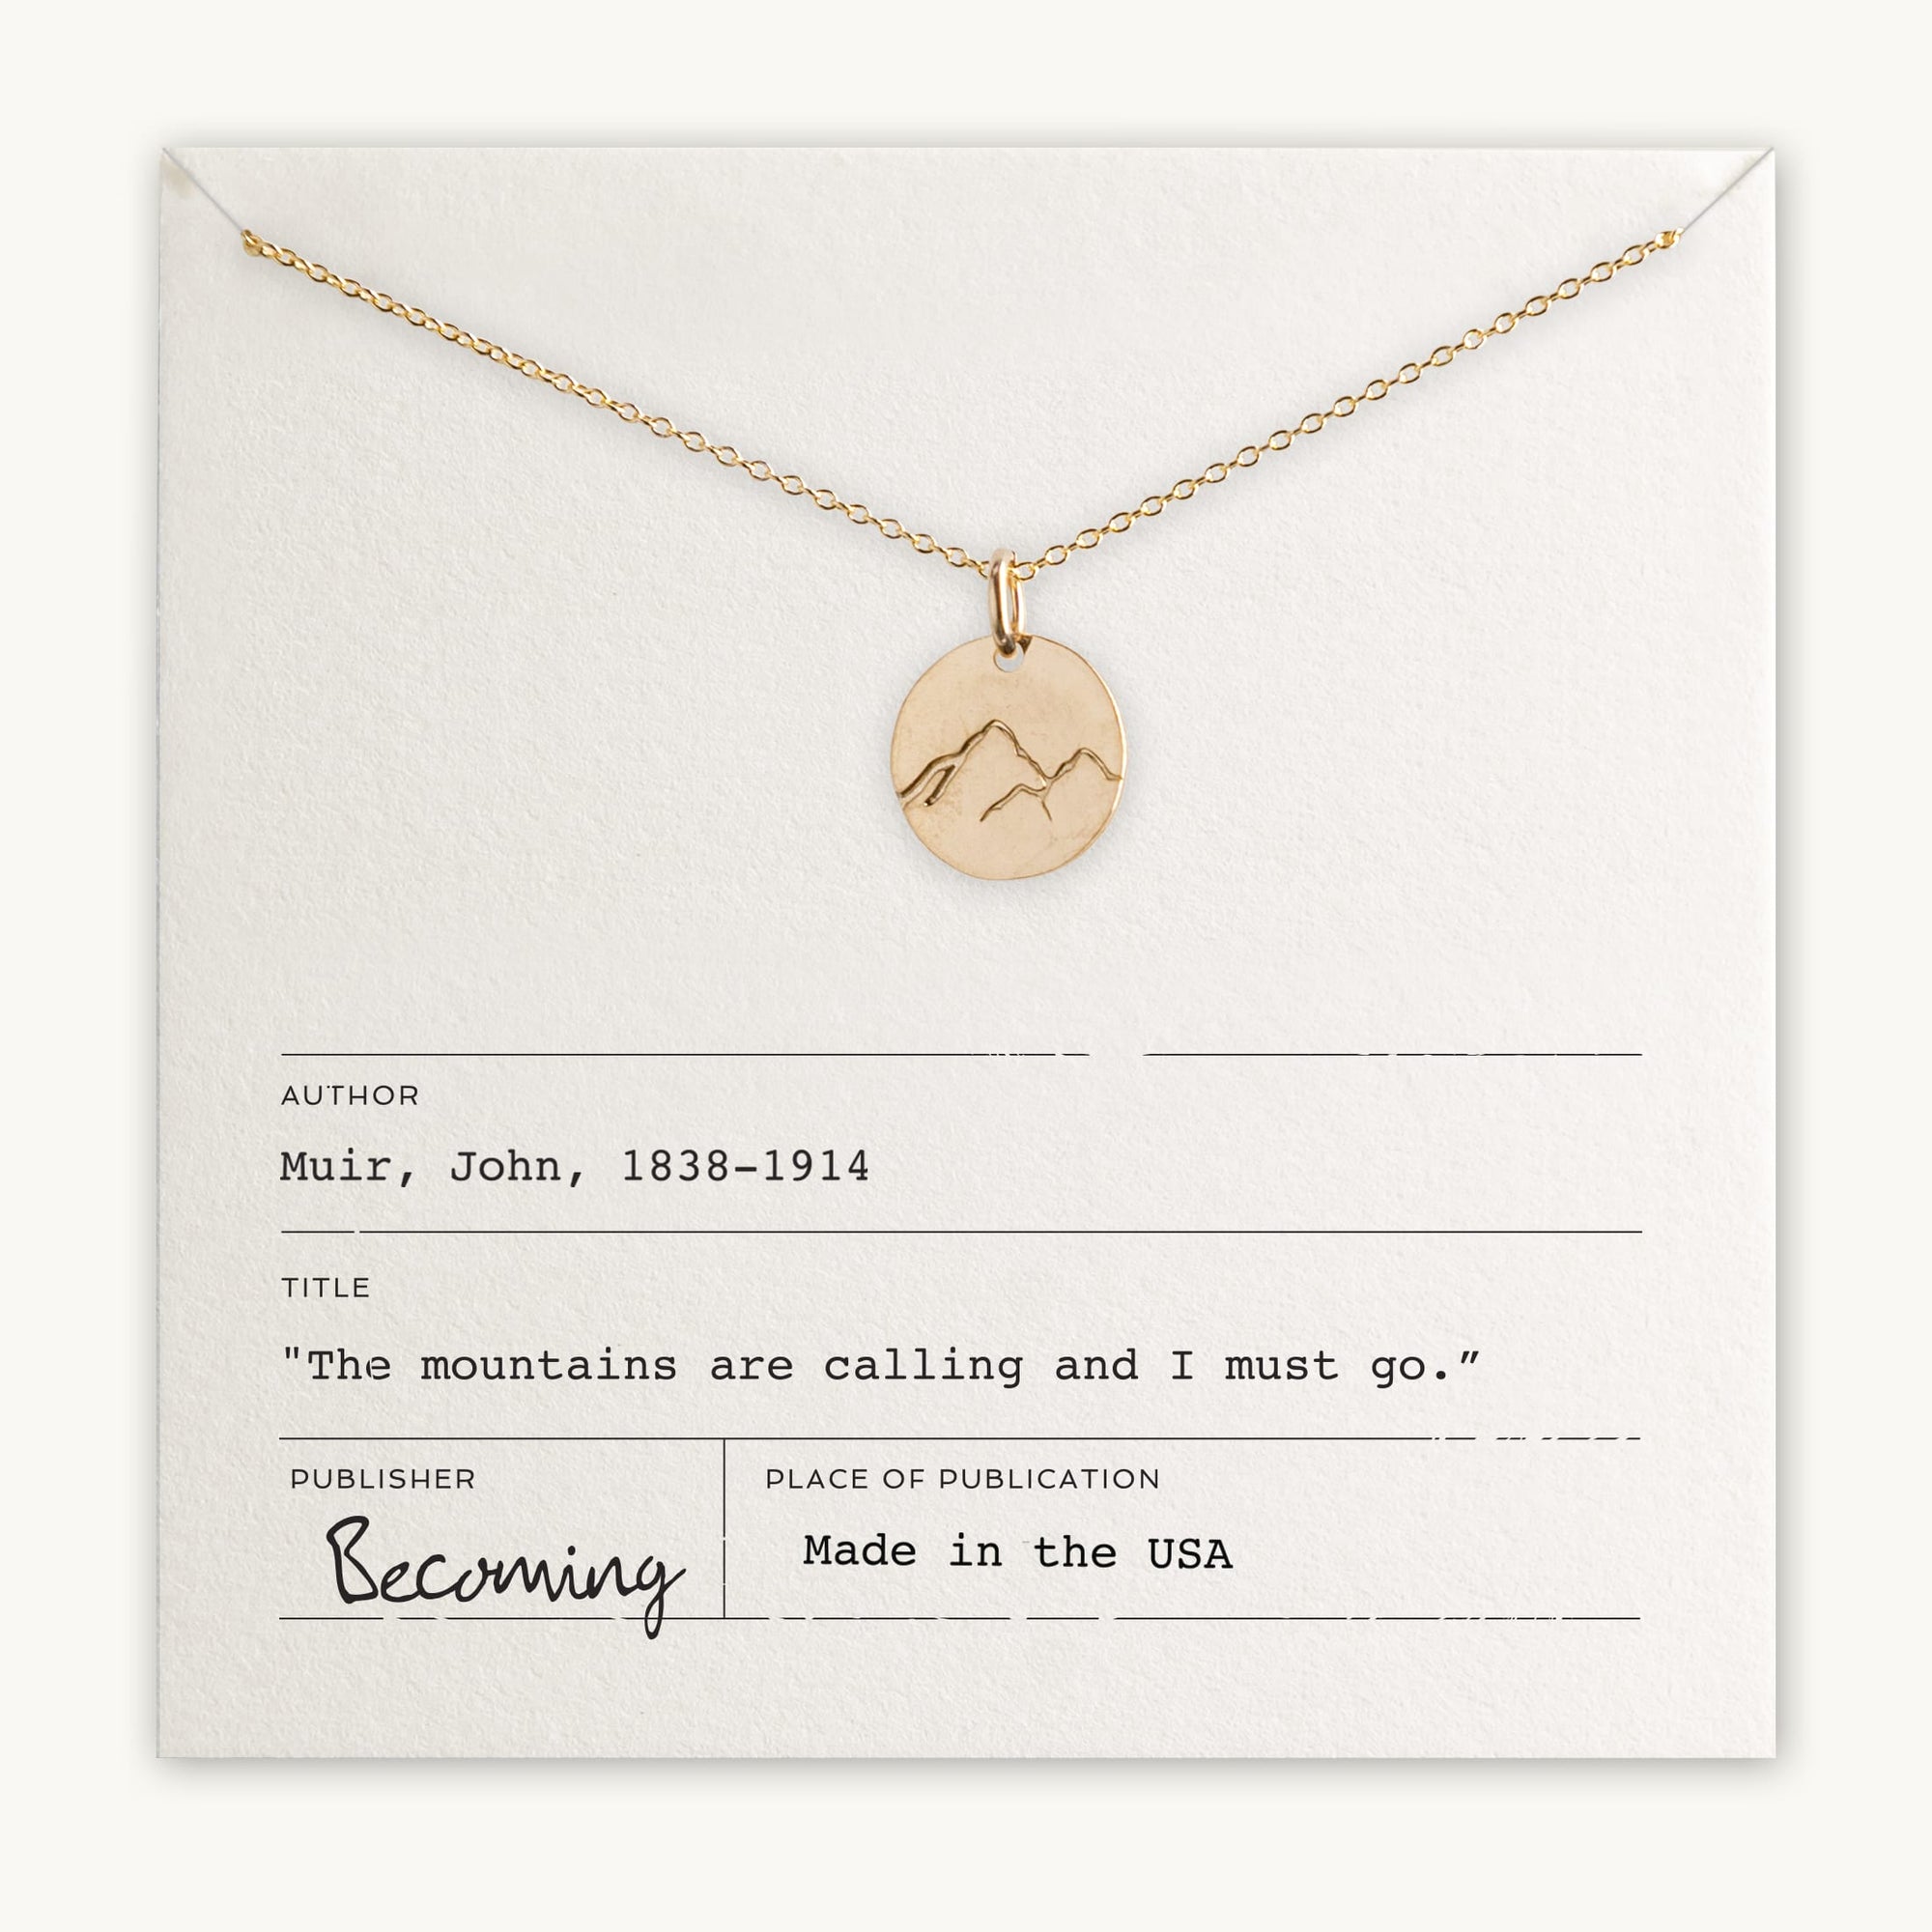 Becoming Jewelry's Mountains Are Calling Necklace pendant necklace with mountain charm displayed on a card with bibliographic-style information, including a quote, "the mountains are calling and I must go.